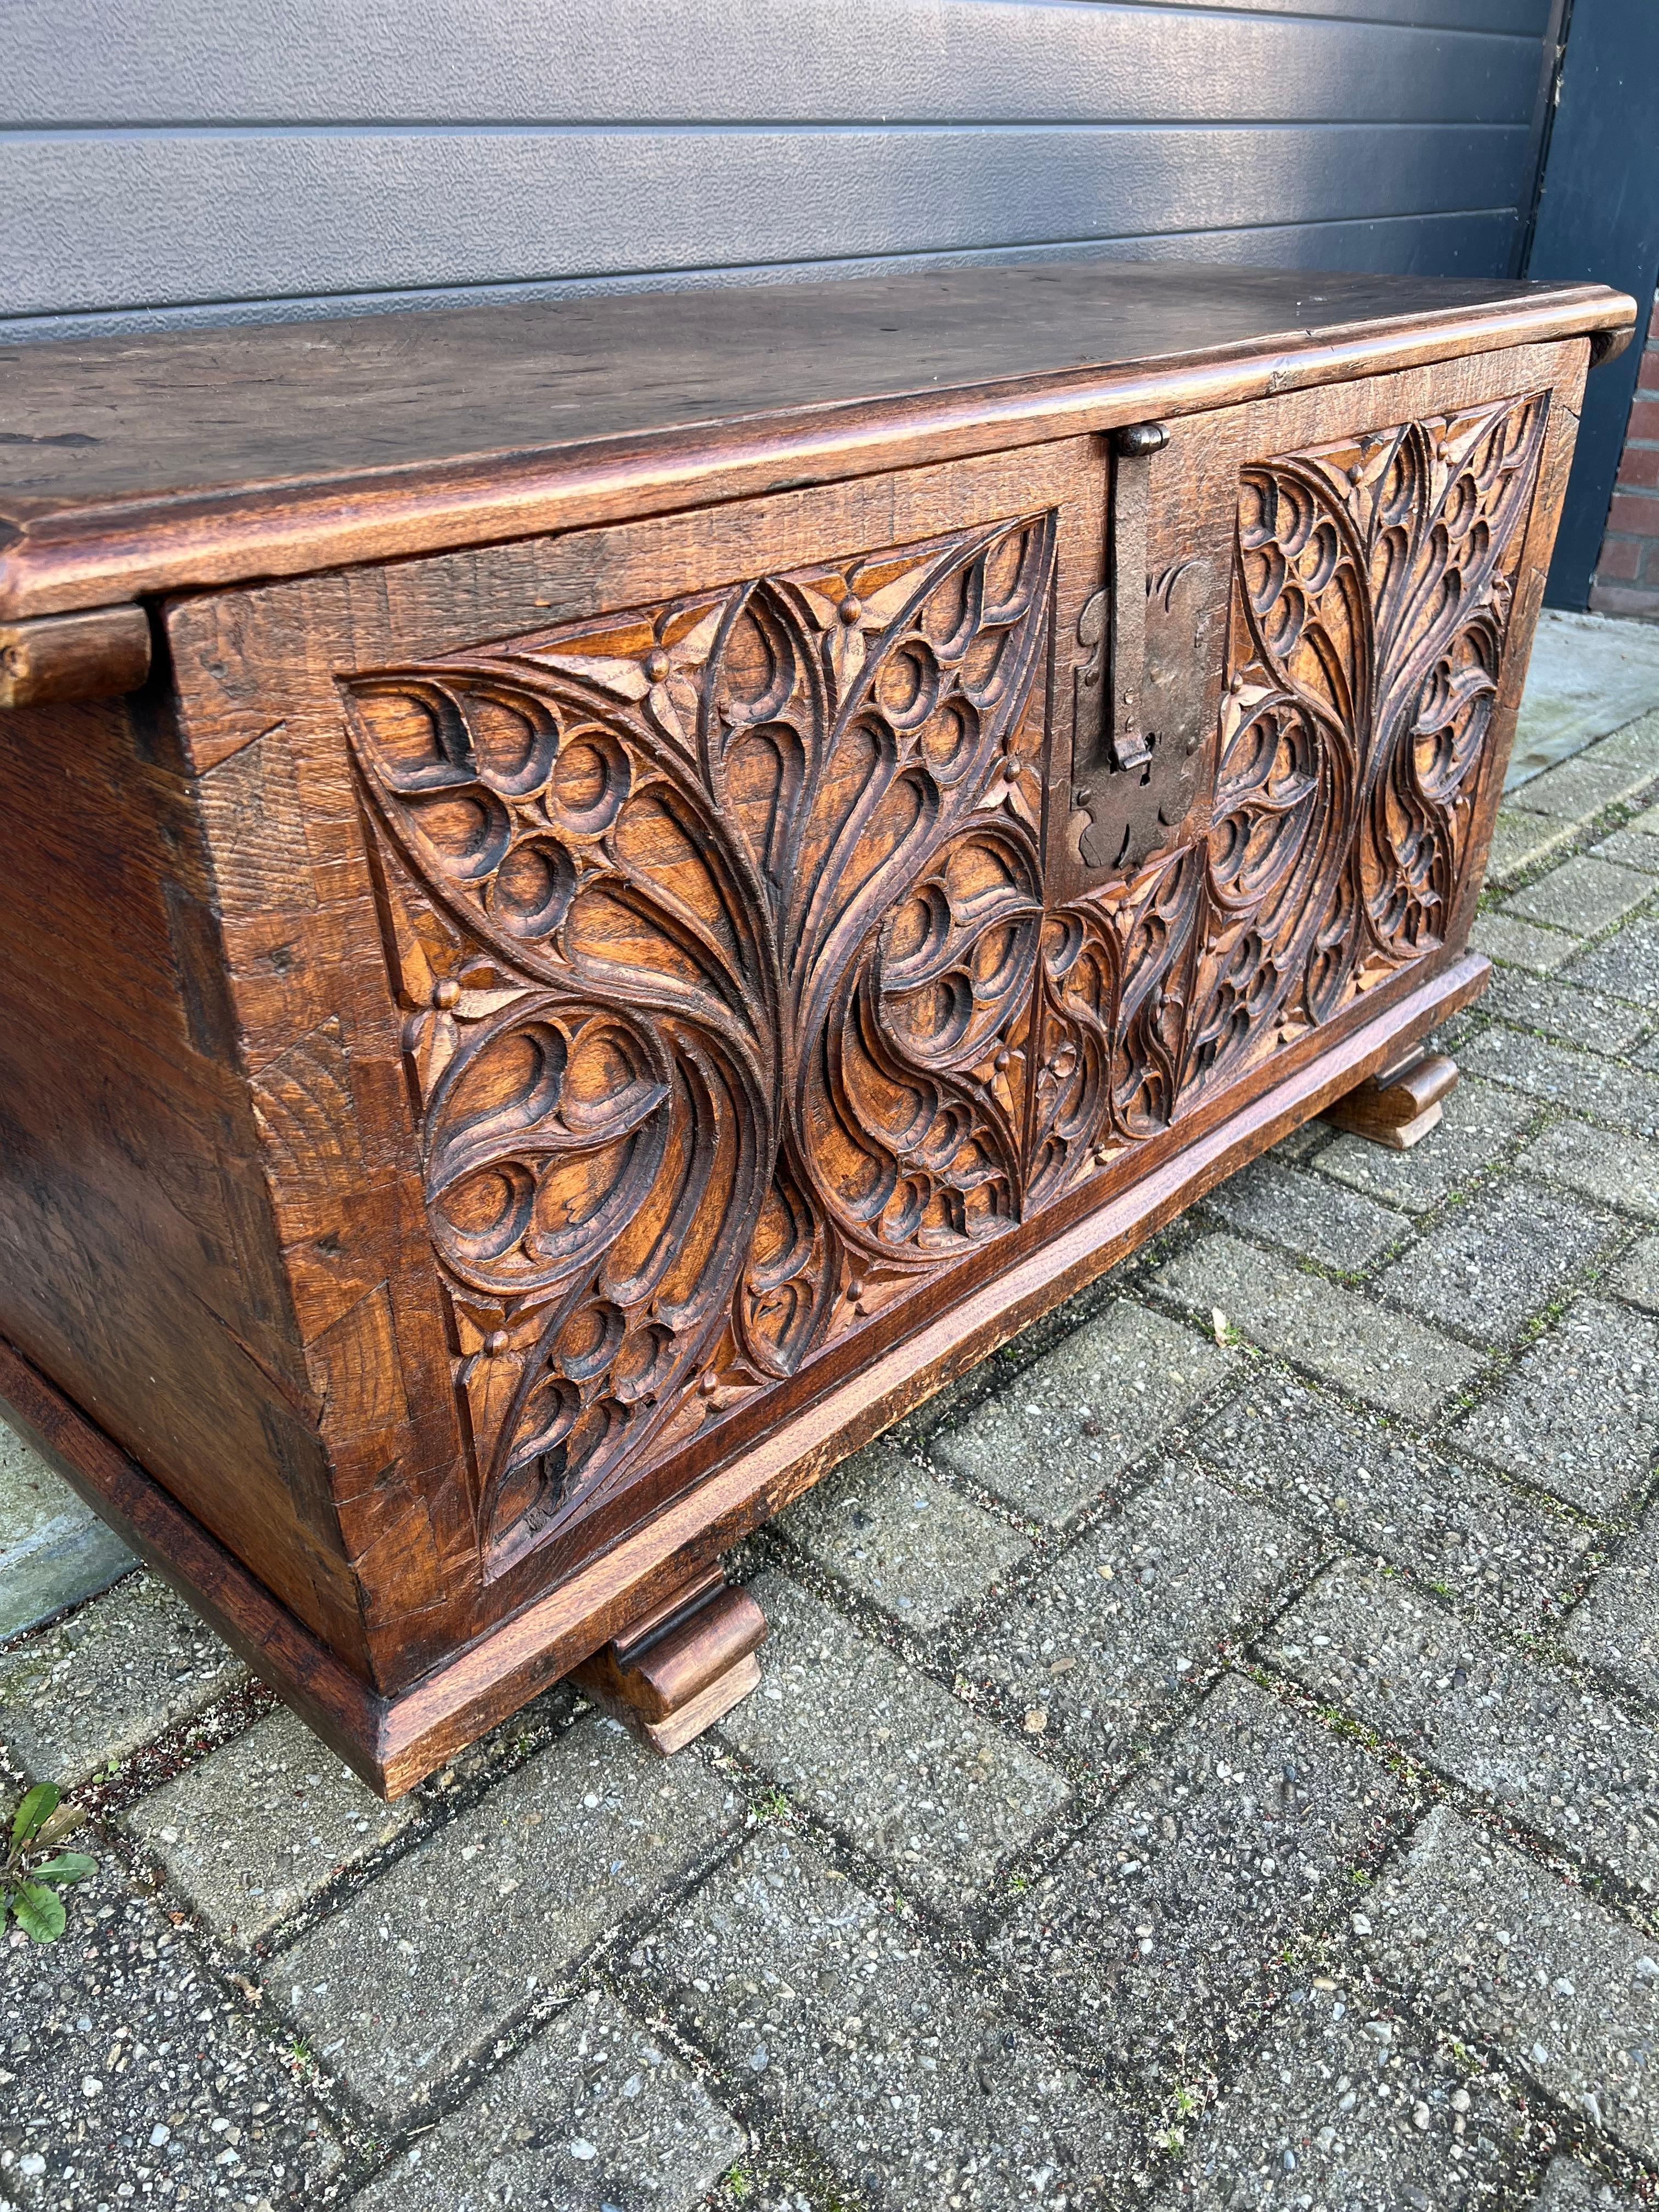 Stunning Antique Gothic Revival Hand Carved Elm Wood Blanket Chest / Trunk 1750 For Sale 1